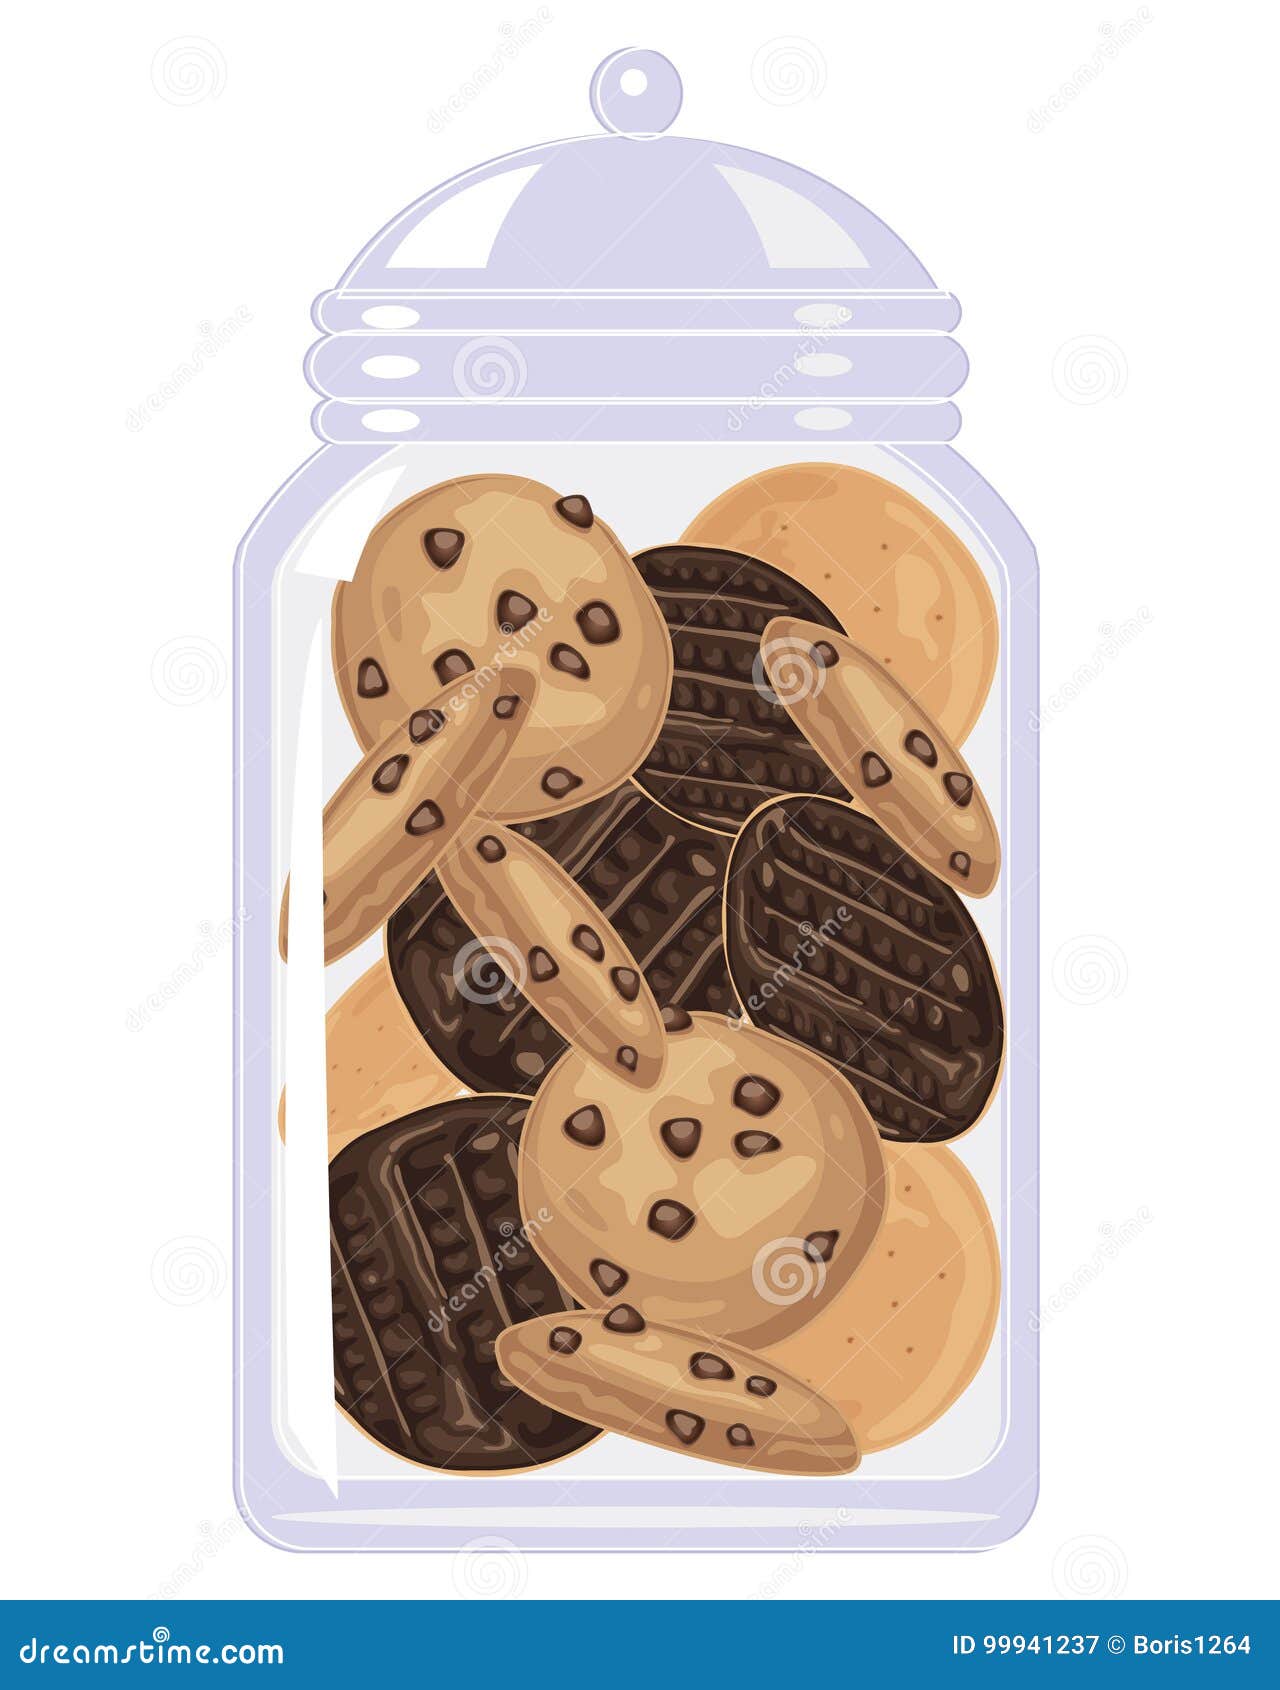 https://thumbs.dreamstime.com/z/jar-bicuits-illustration-clear-glass-full-chocolate-digestives-chip-cookies-white-background-99941237.jpg